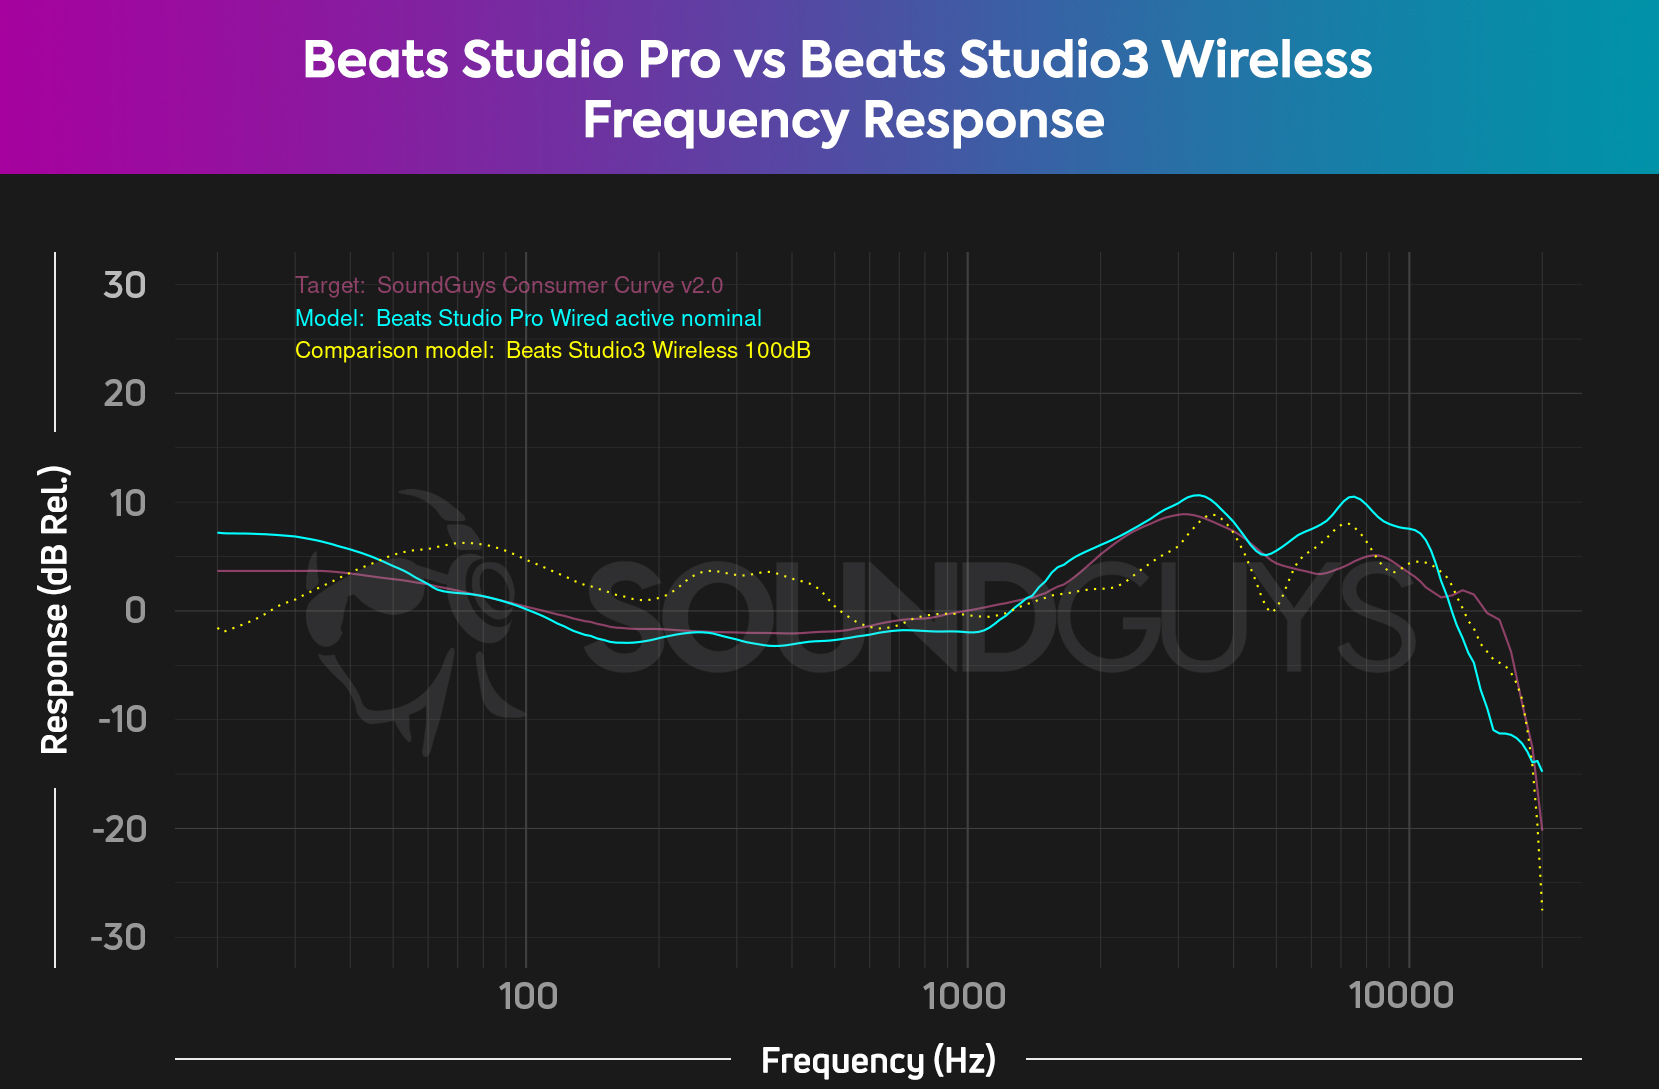 The Beats Studio3 Wireless has a lot more bass, and it's not a good thing. The Beats Studio Pro has solved this problem.